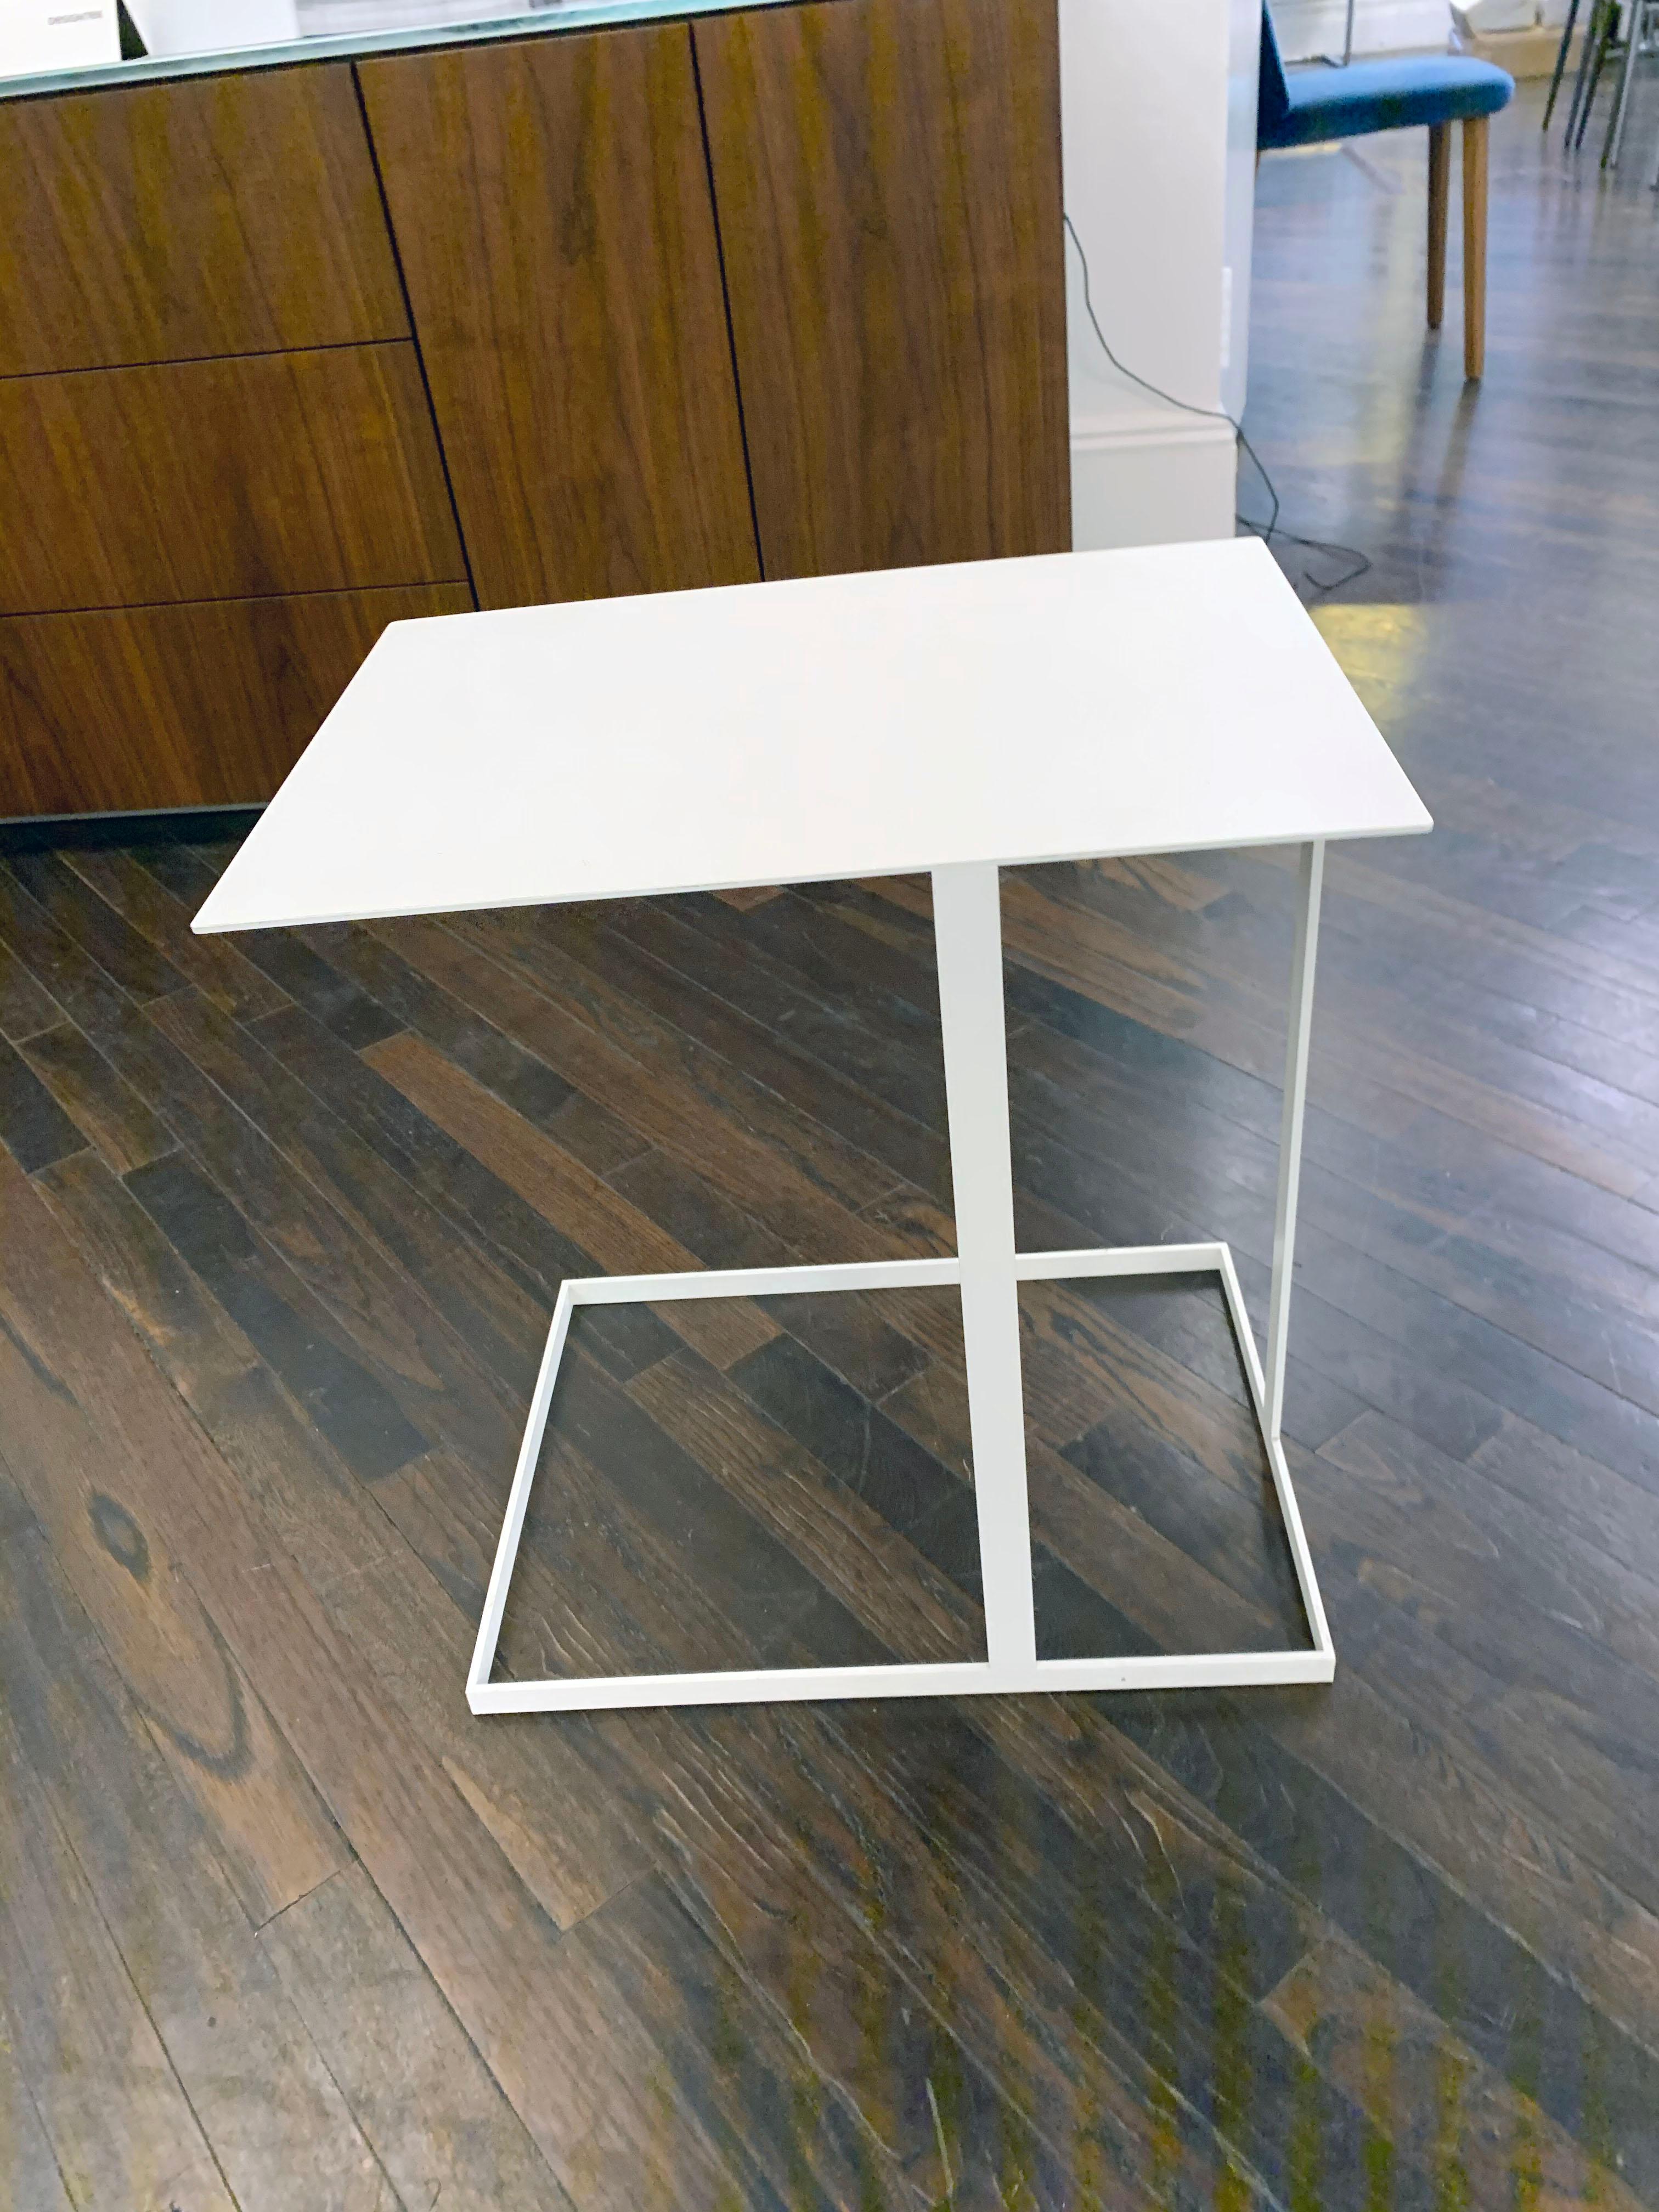 Annex is a multifunctional side table. The support has asymmetrical structures of flat metal strips. The functions of the free tabletop with projection are obvious and are ideal for working from the couch or lounge chair with a laptop, for putting